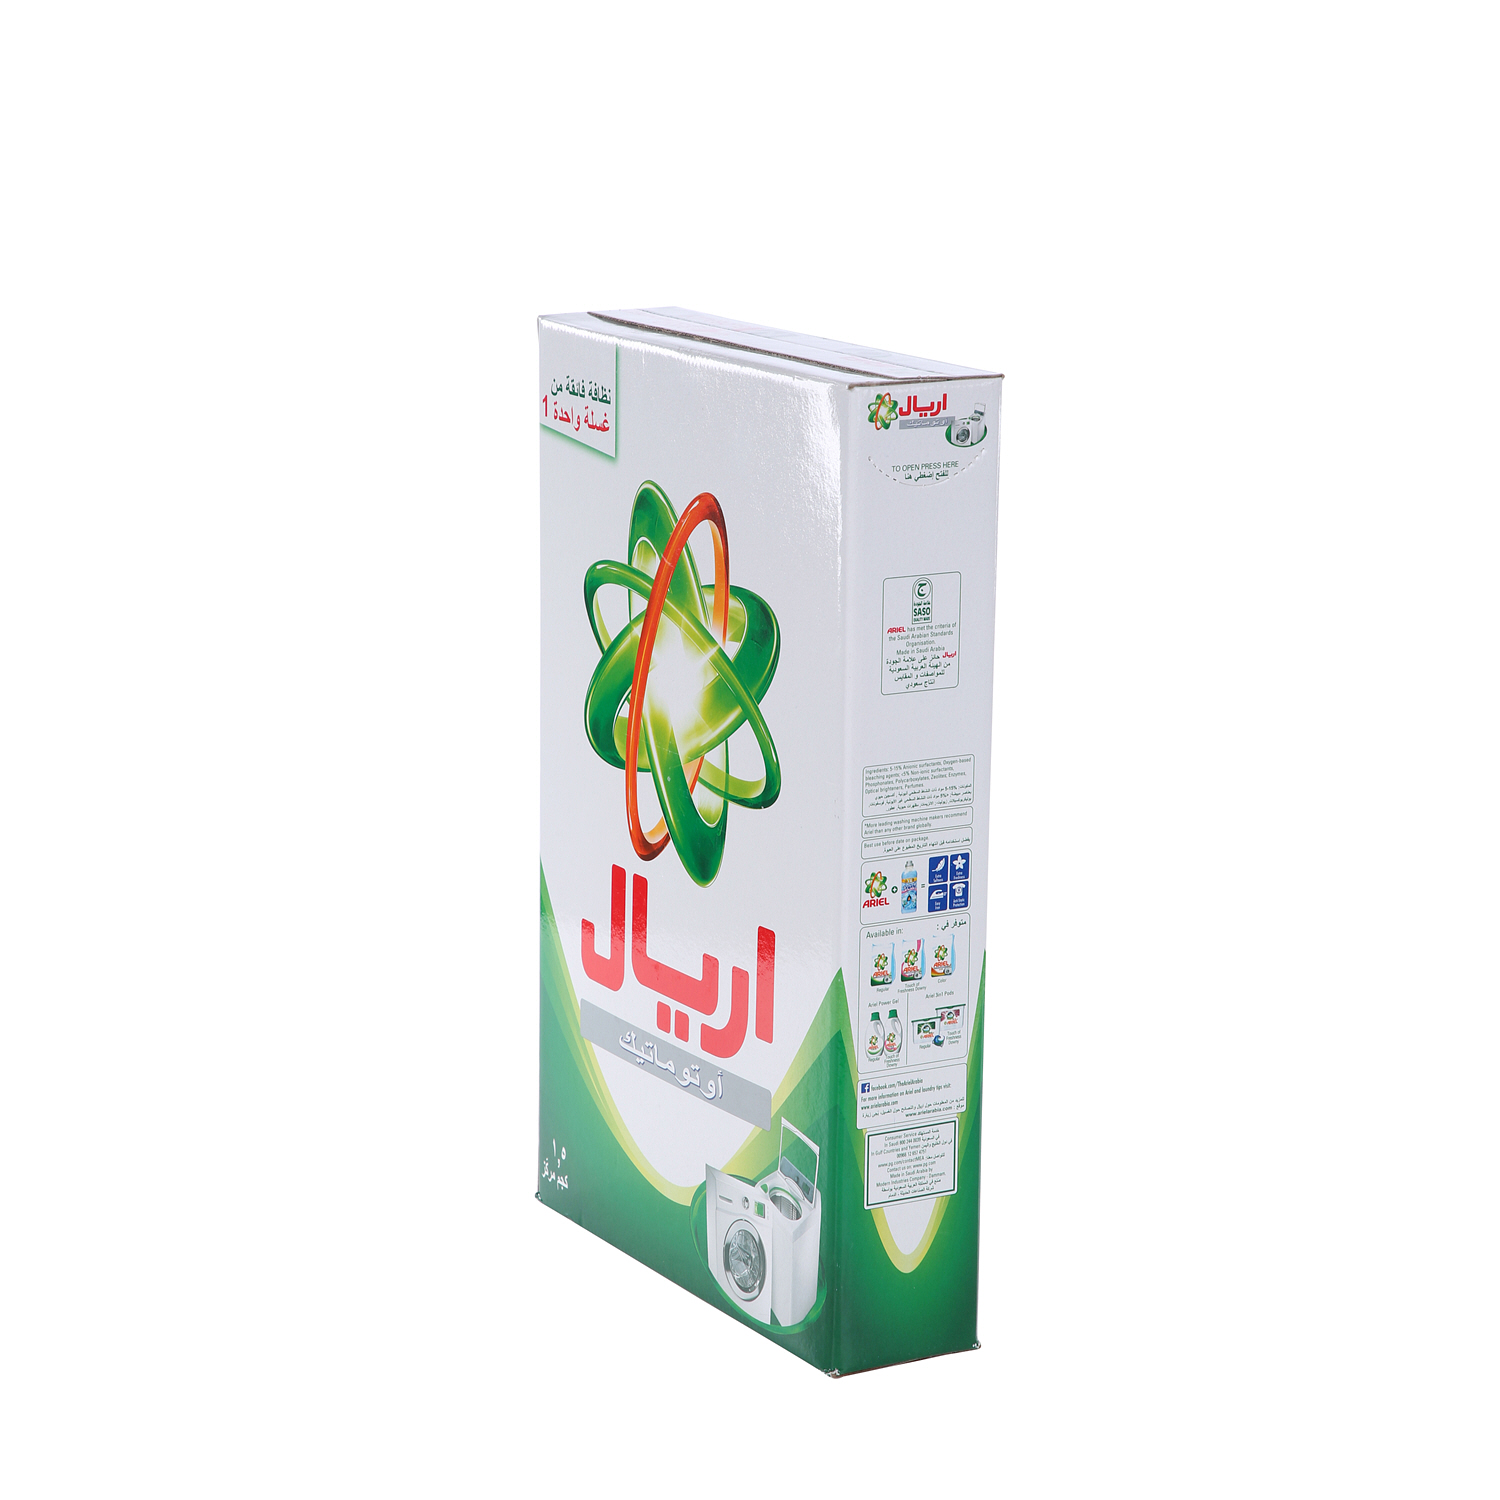 Ariel Detergent Concentrated Green Automatic 1.5 Kg